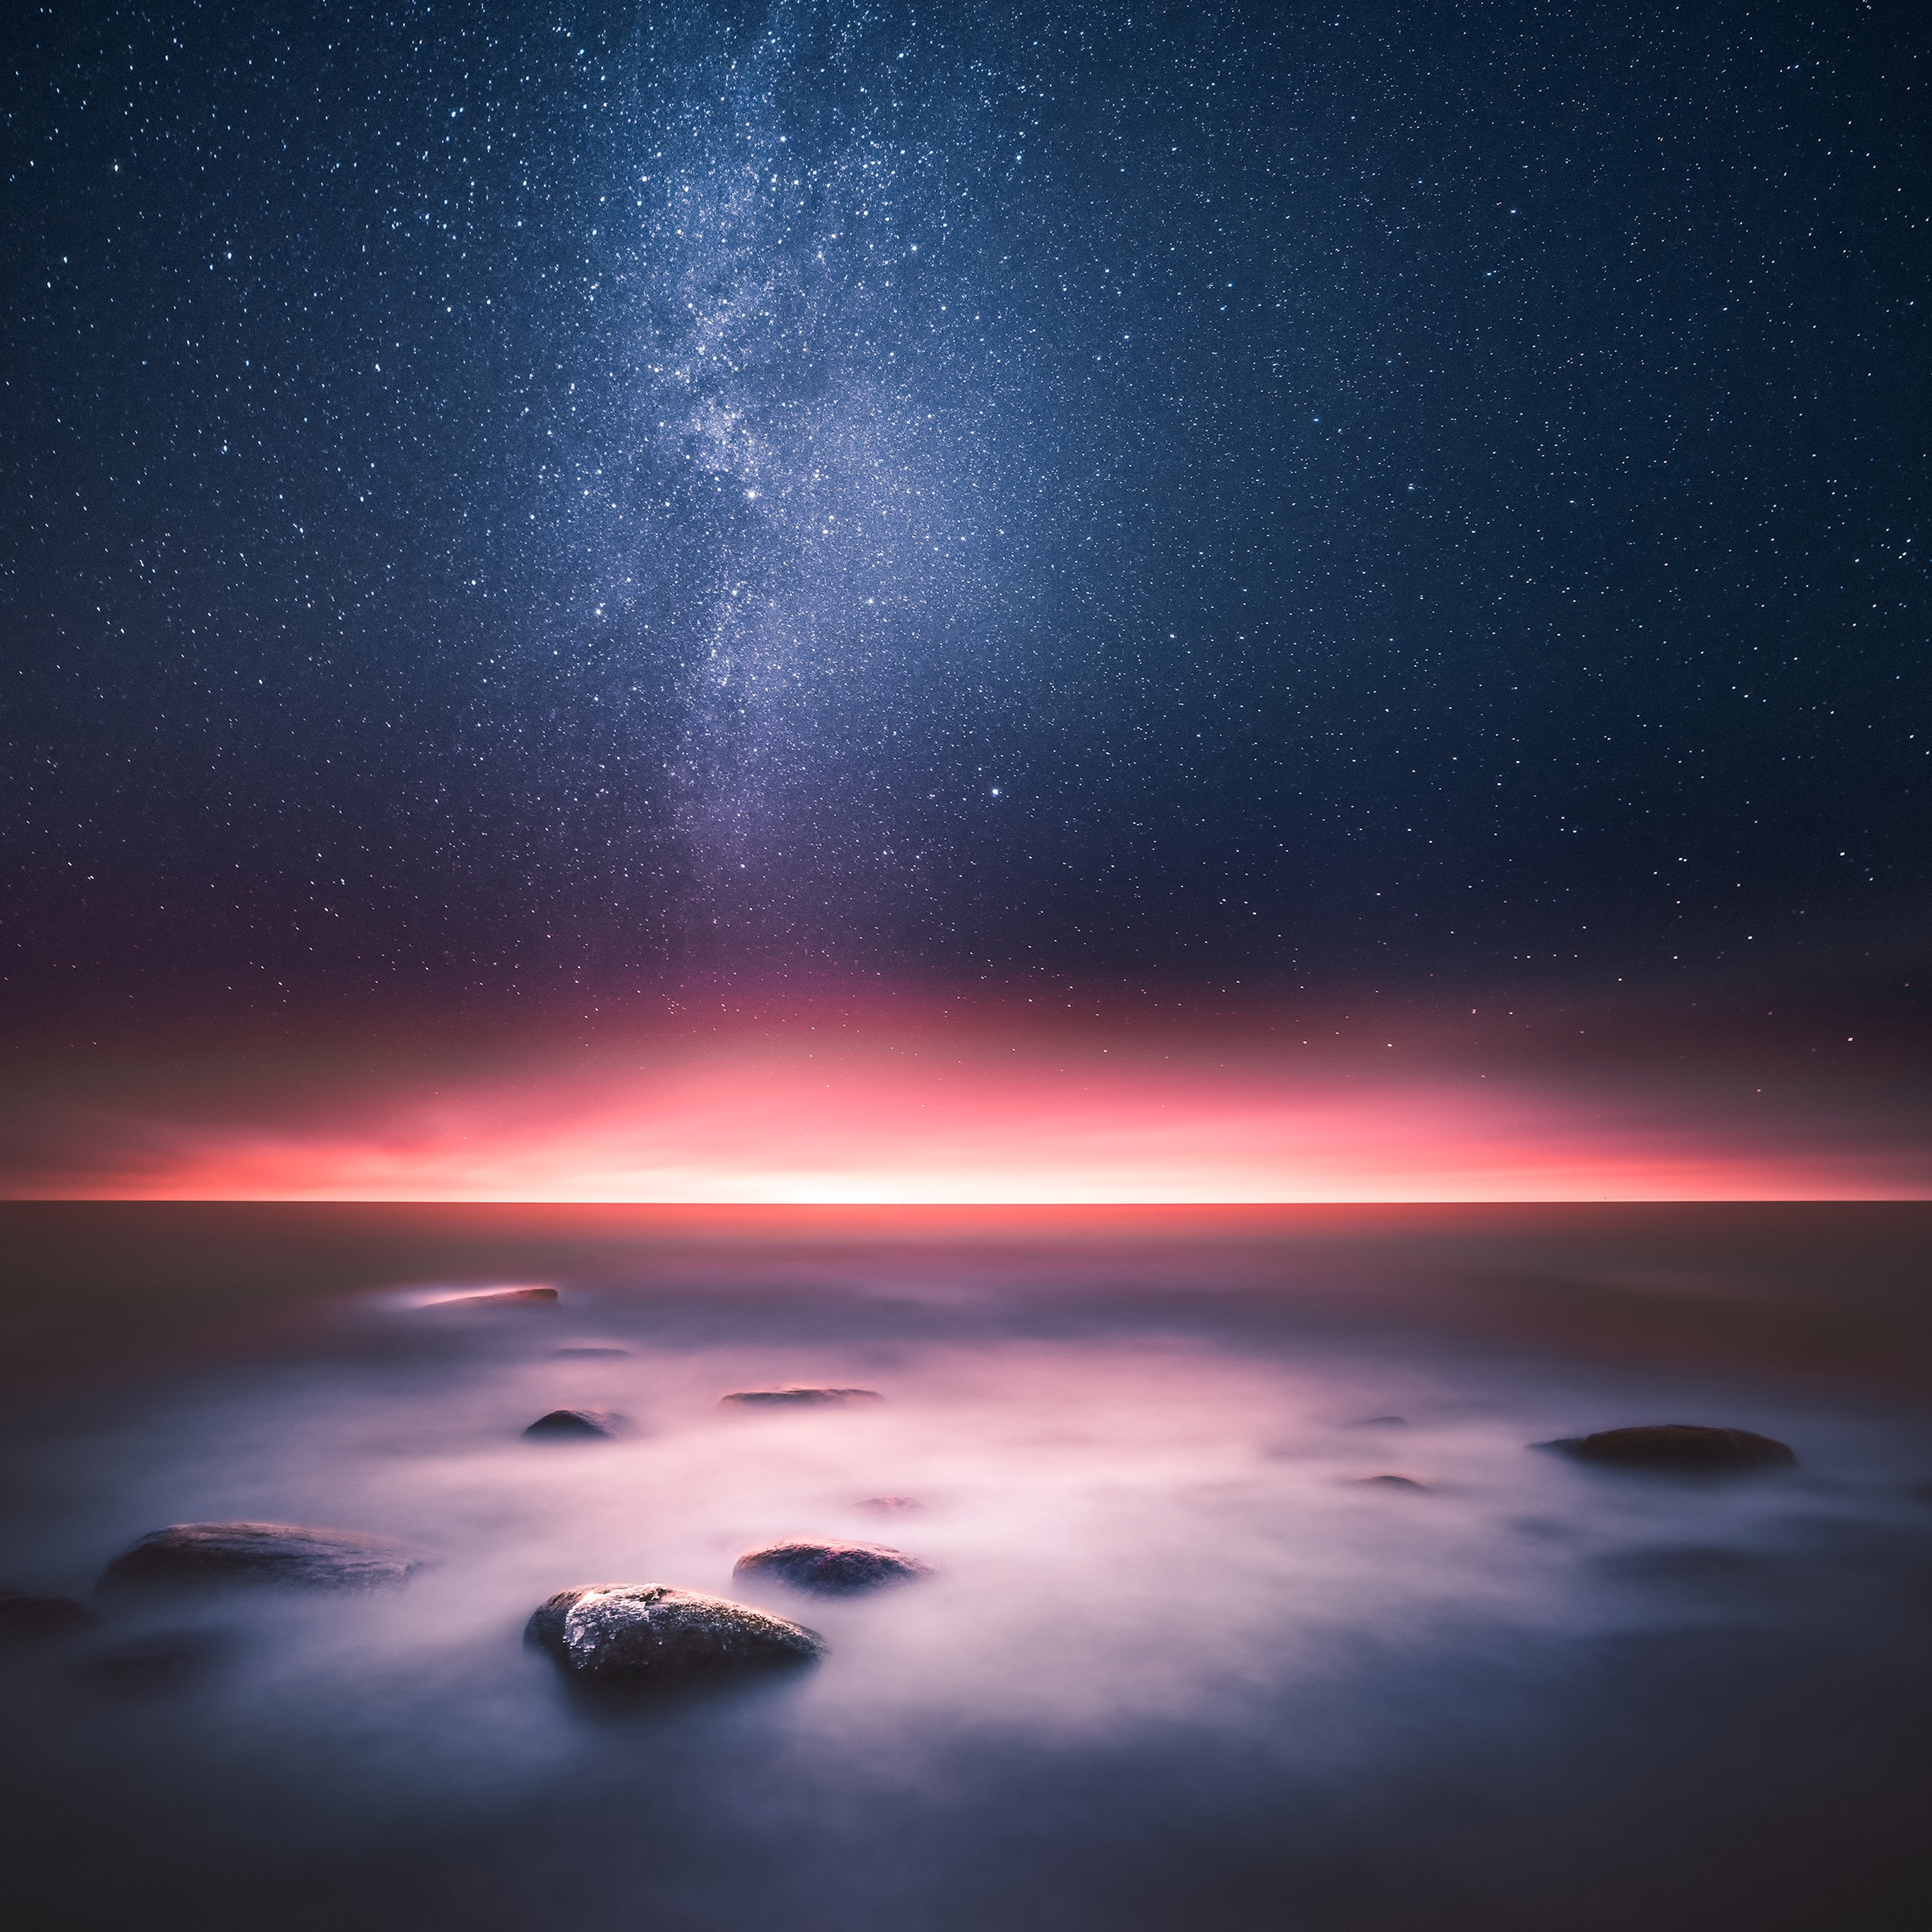 Free photo Nighttime ocean shore with the Milky Way in the sky